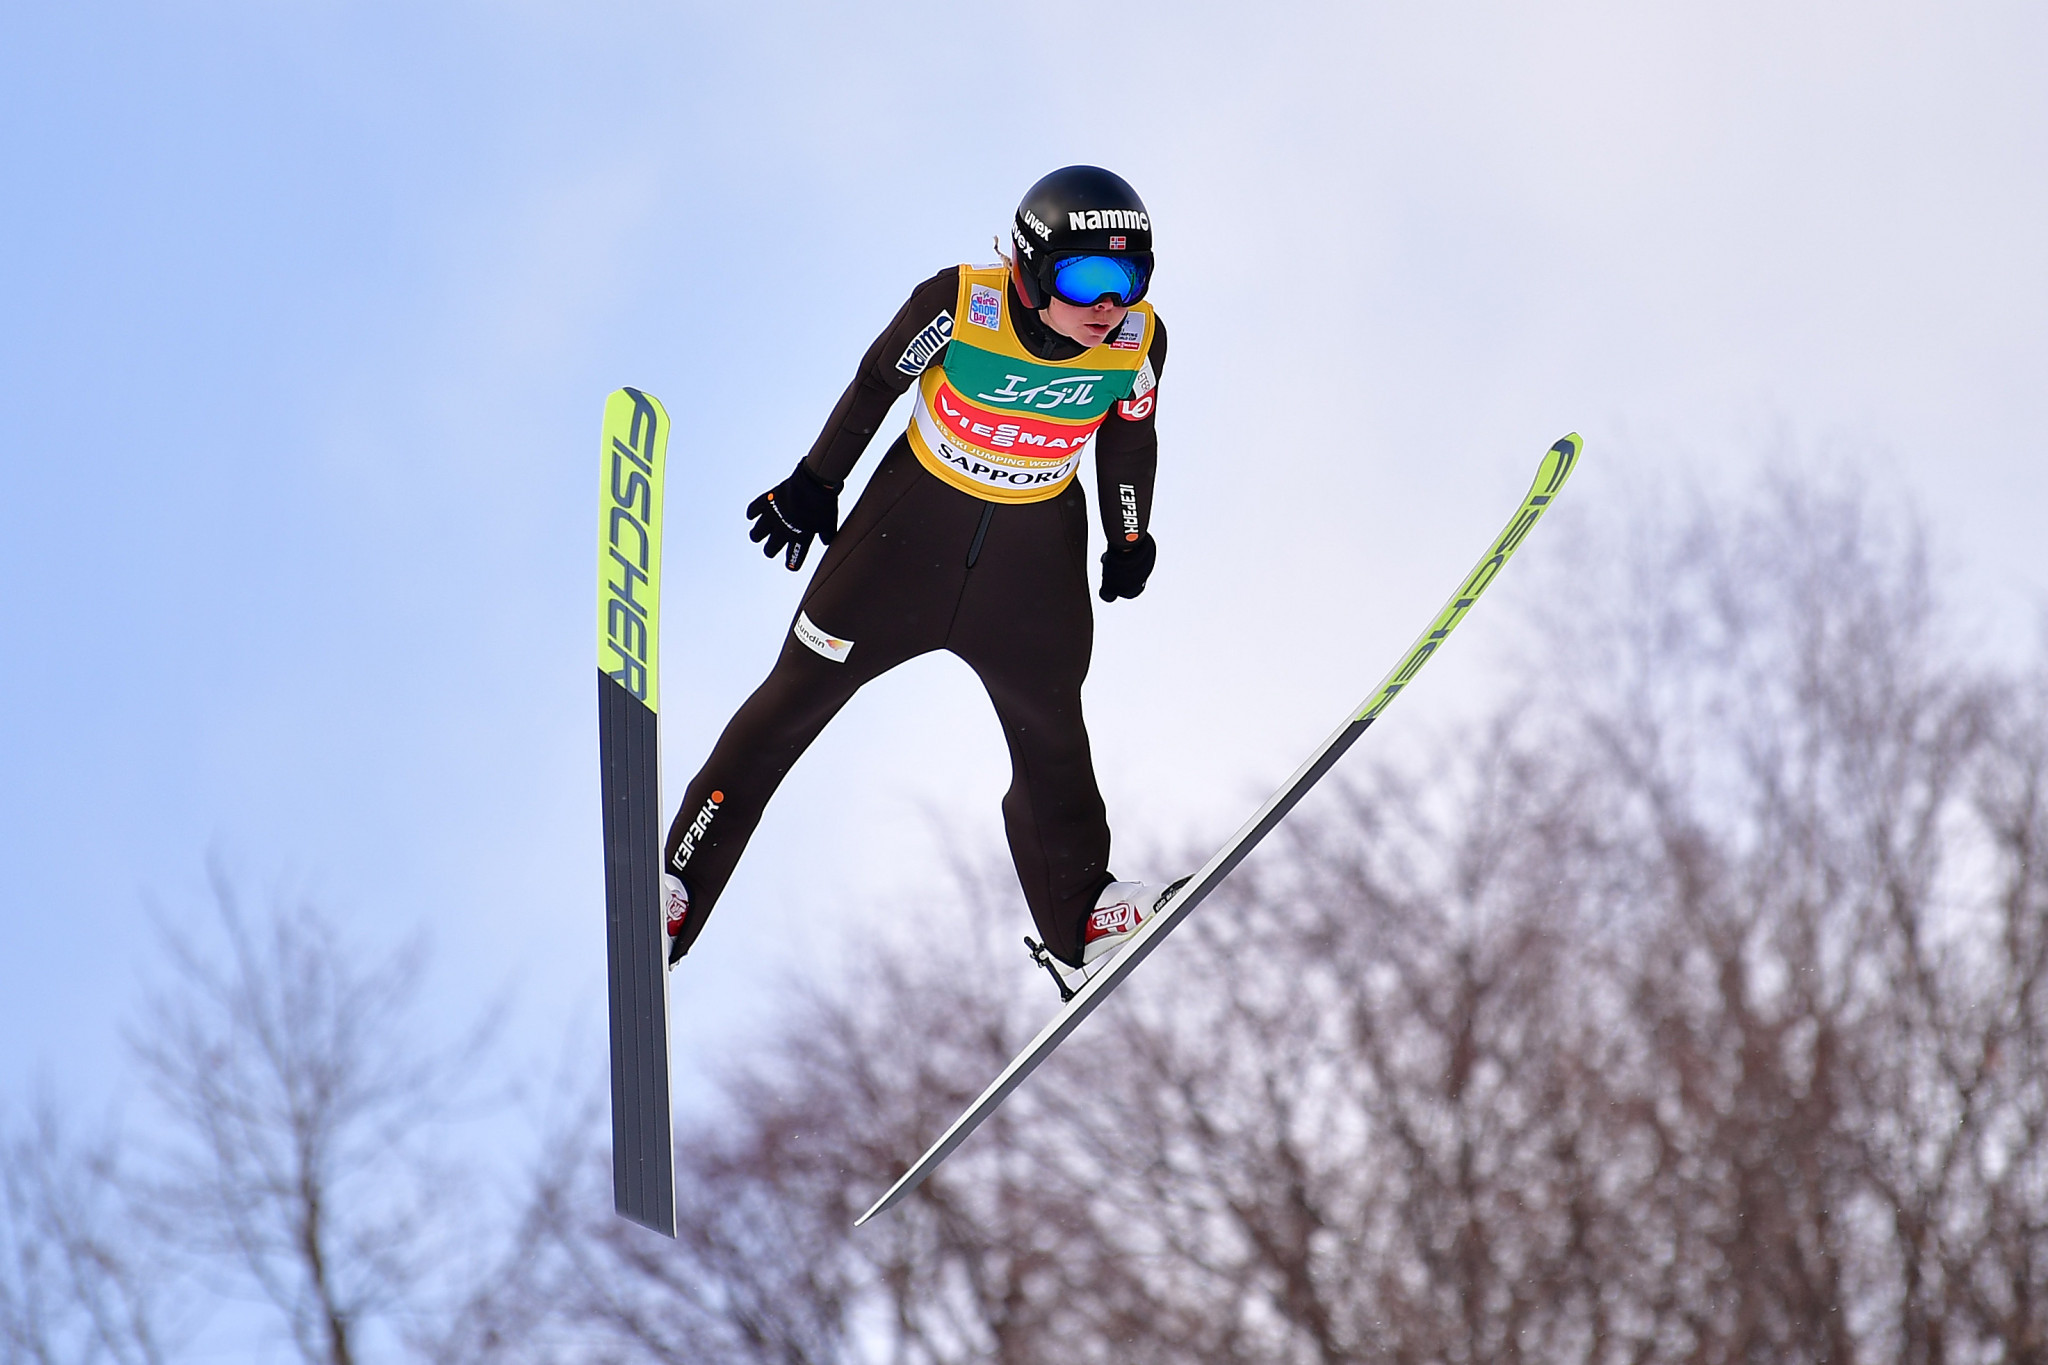 Lundby to defend title at FIS Ski Jumping World Cup event in Zao